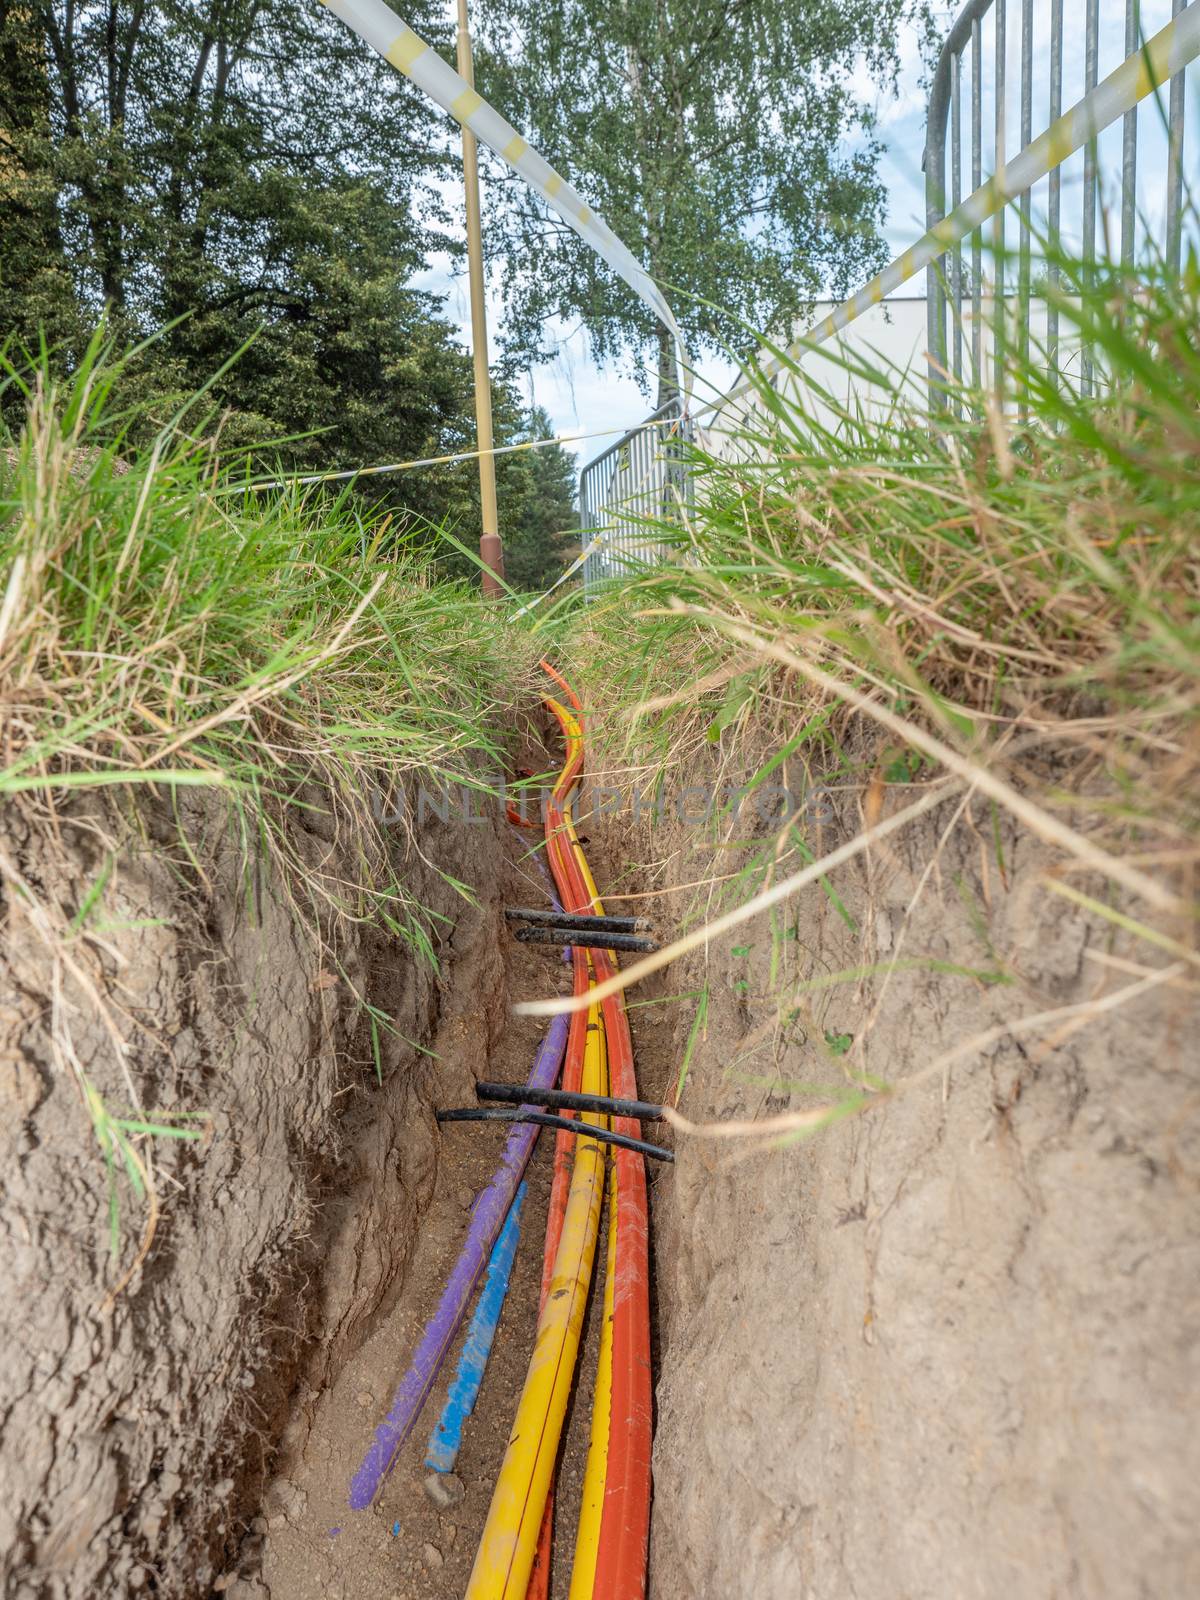 Ground work the installation of fiber optic cables by rdonar2